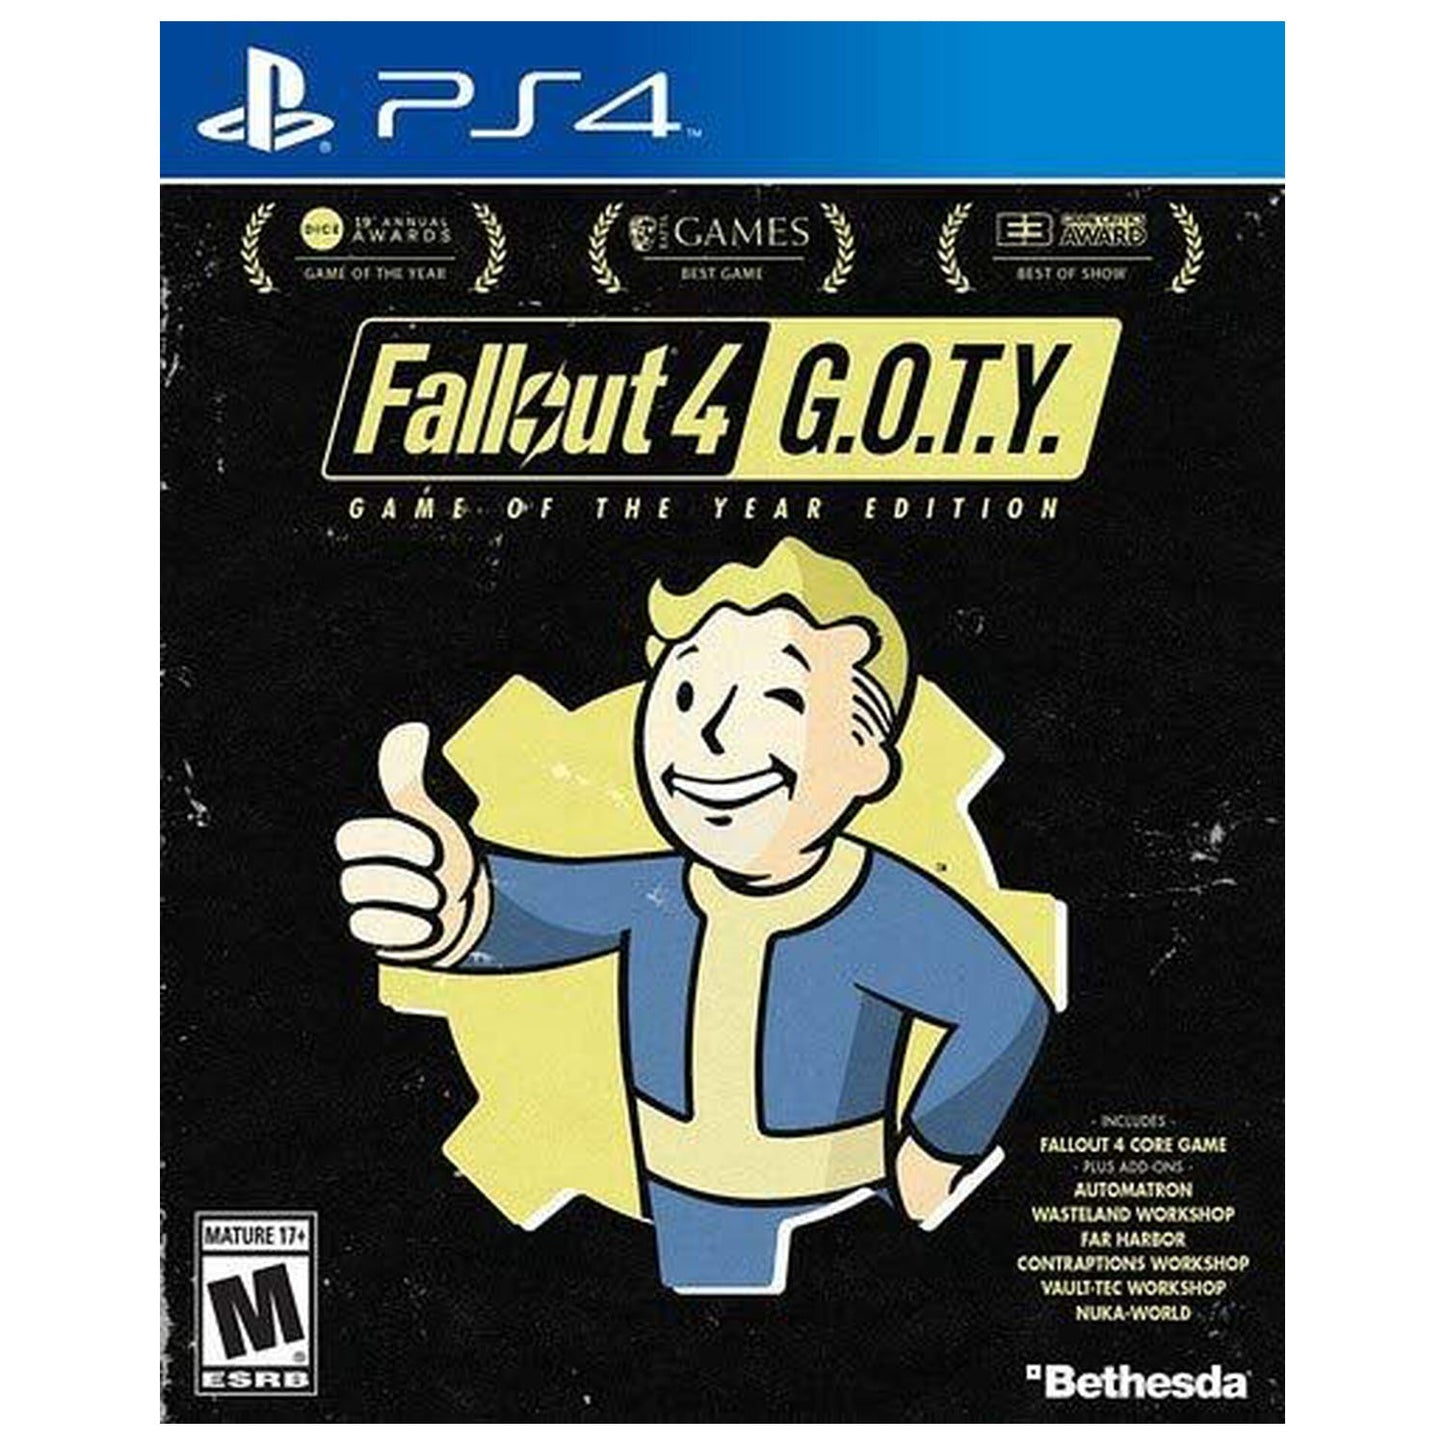 Fallout 4 GOTY Ps4